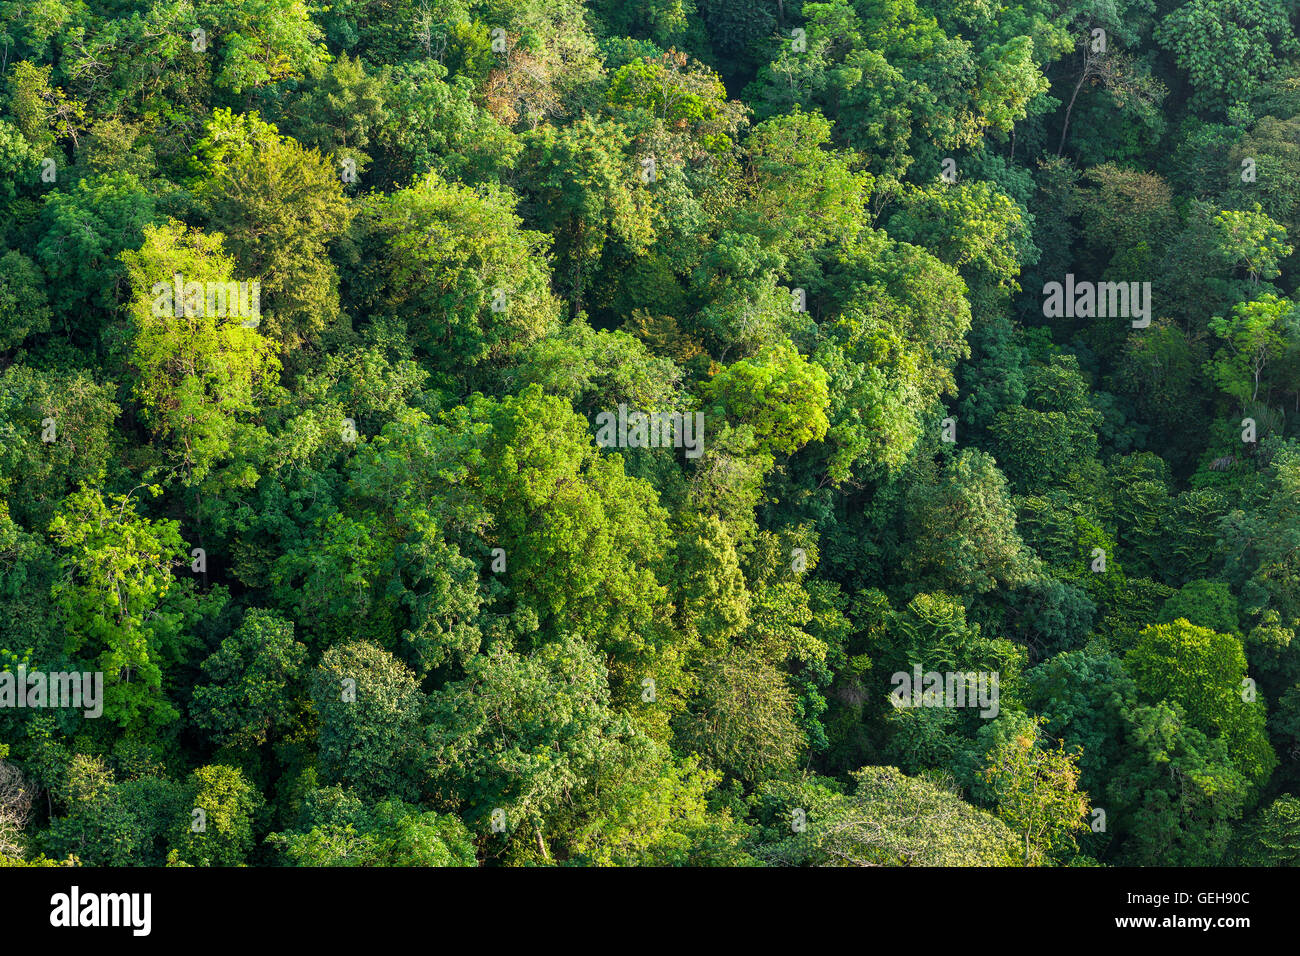 Aerial shot of a lush tropical forest 2 Stock Photo